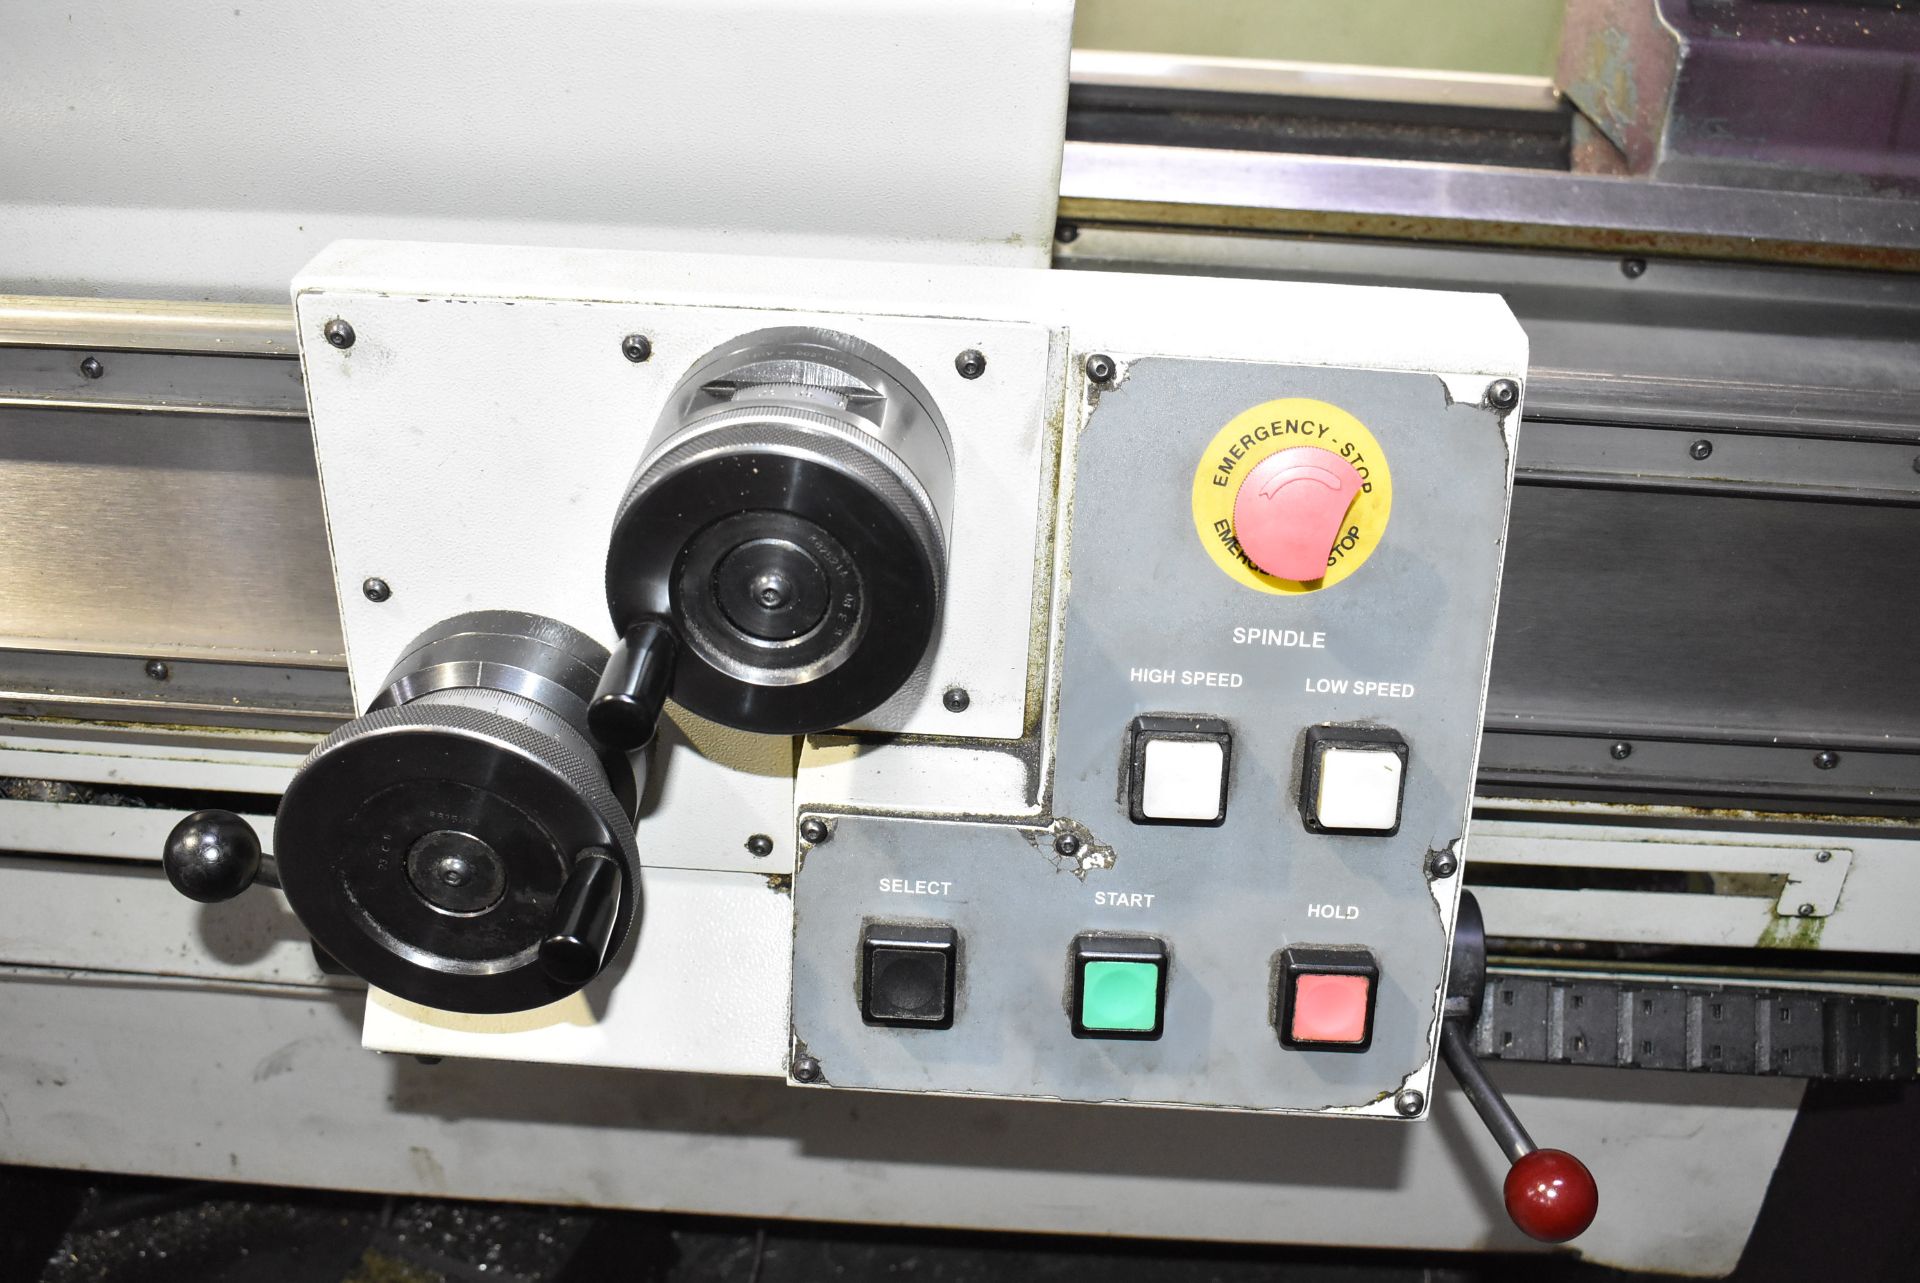 BRIDGEPORT EZ-PATH SD CNC LATHE WITH 40" DISTANCE BETWEEN CENTERS, 17" SWING OVER BED, 8" SWING OVER - Image 9 of 11